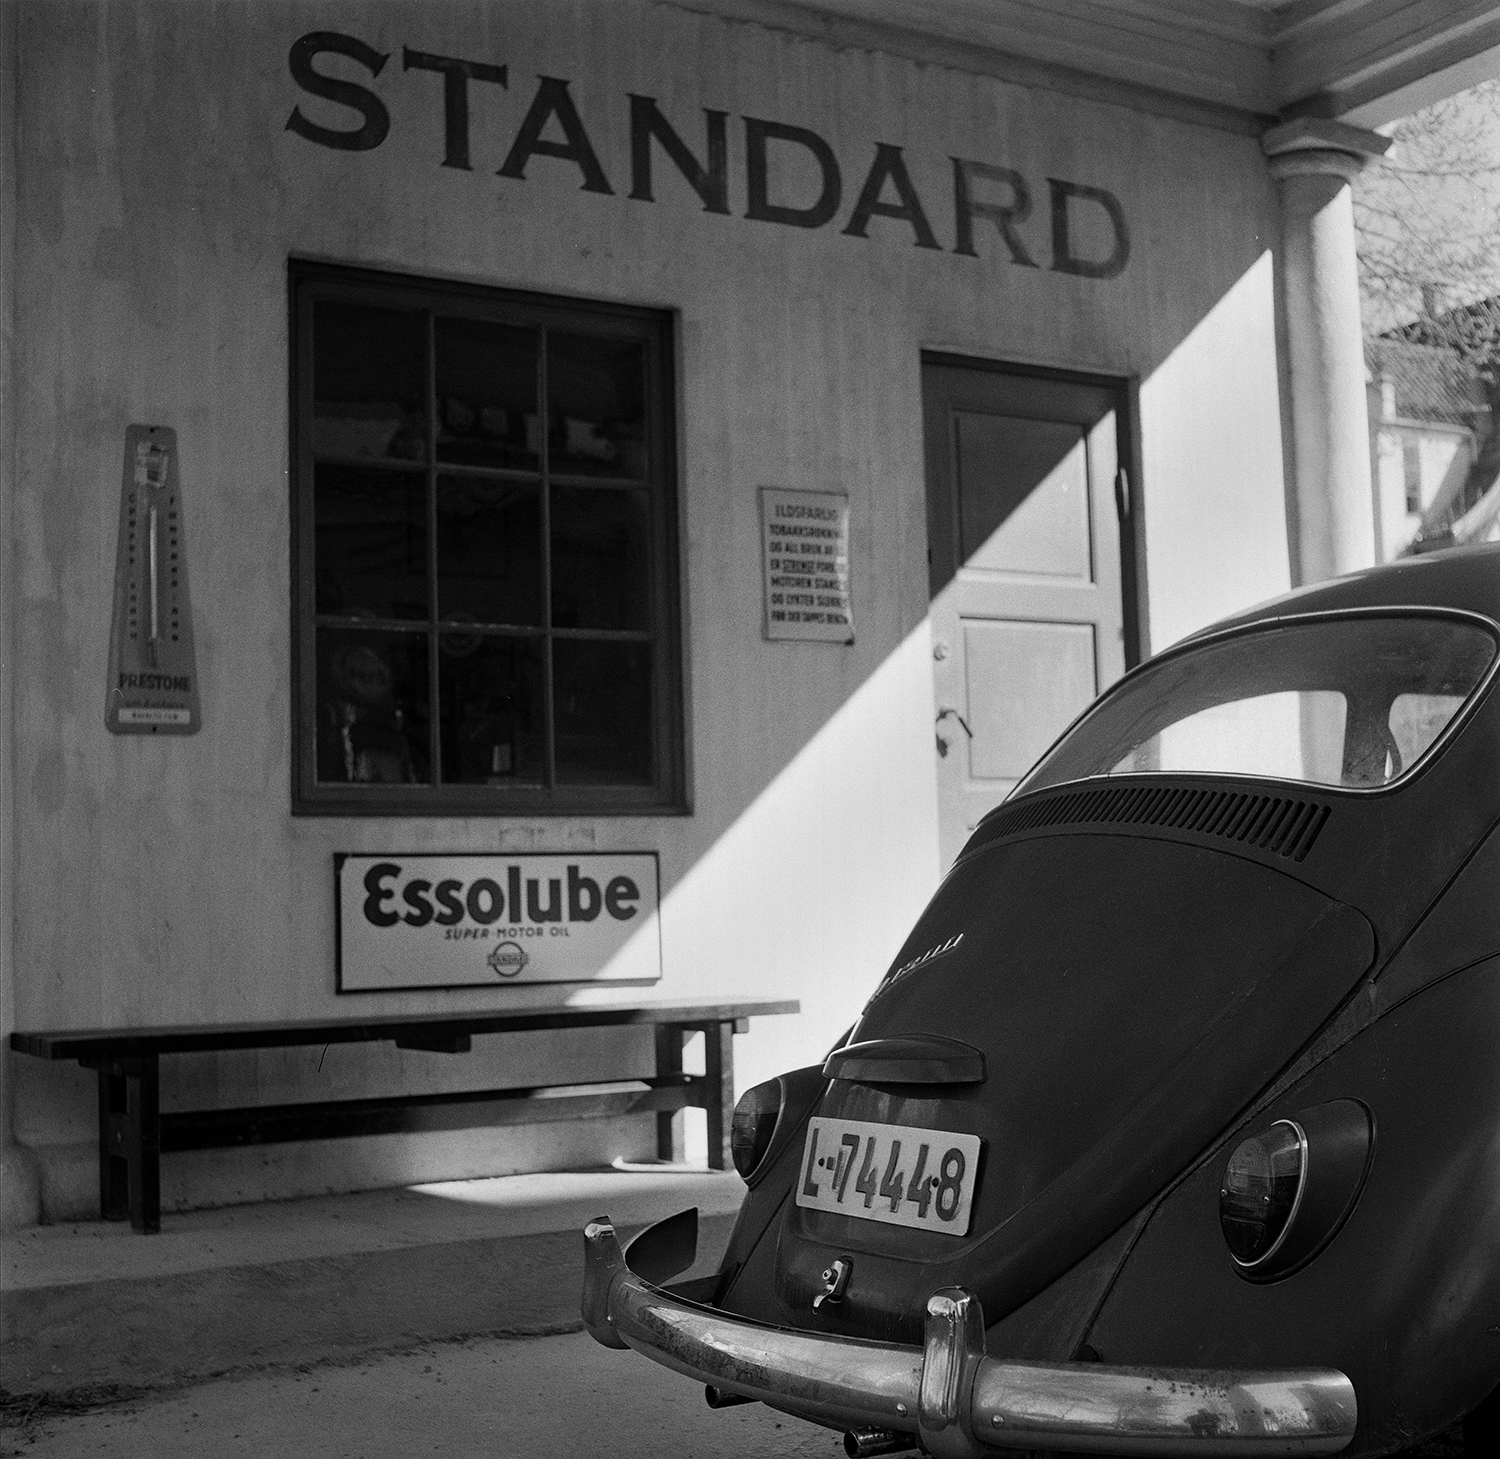 Standard esso Oslo shot on ILFORD black and white film by Keith Moss